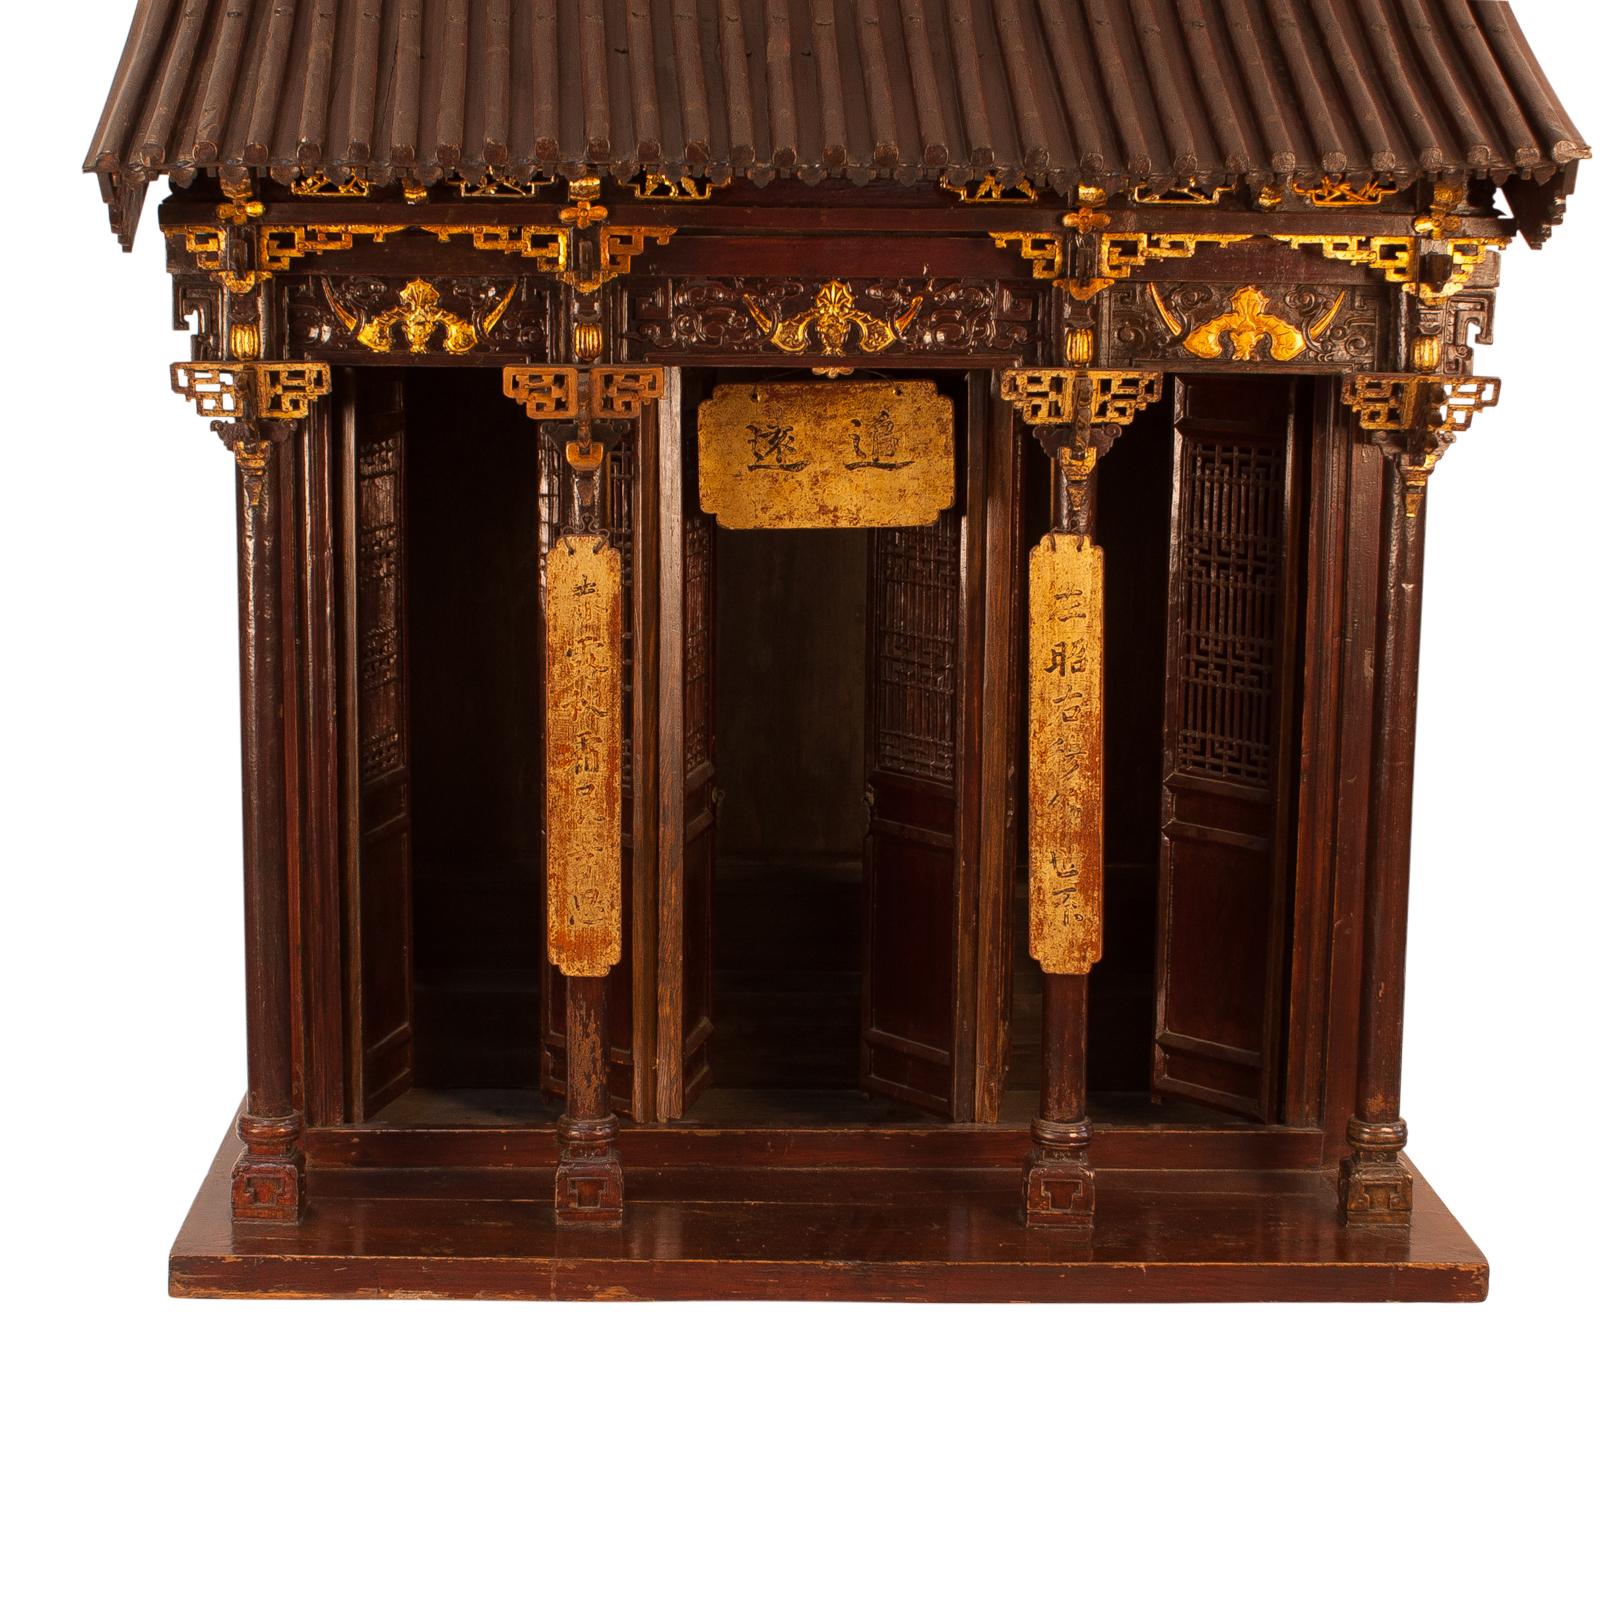 A large scale Chinese ancestral shrine, 57